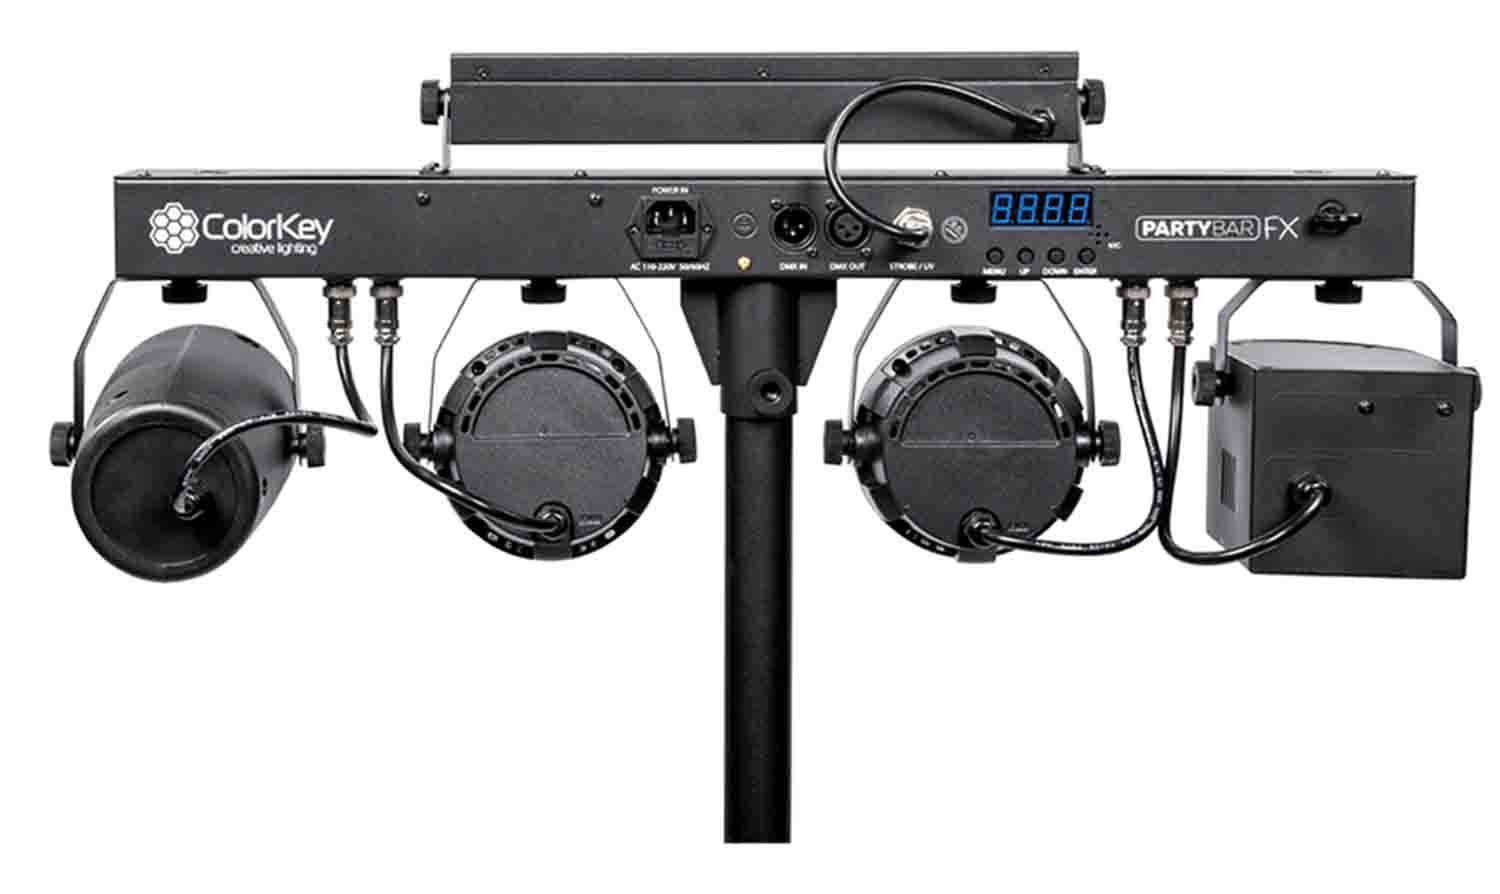 ColorKey CKU-3030 PartyBar FX Multi Effect Professional Lighting Package - Hollywood DJ